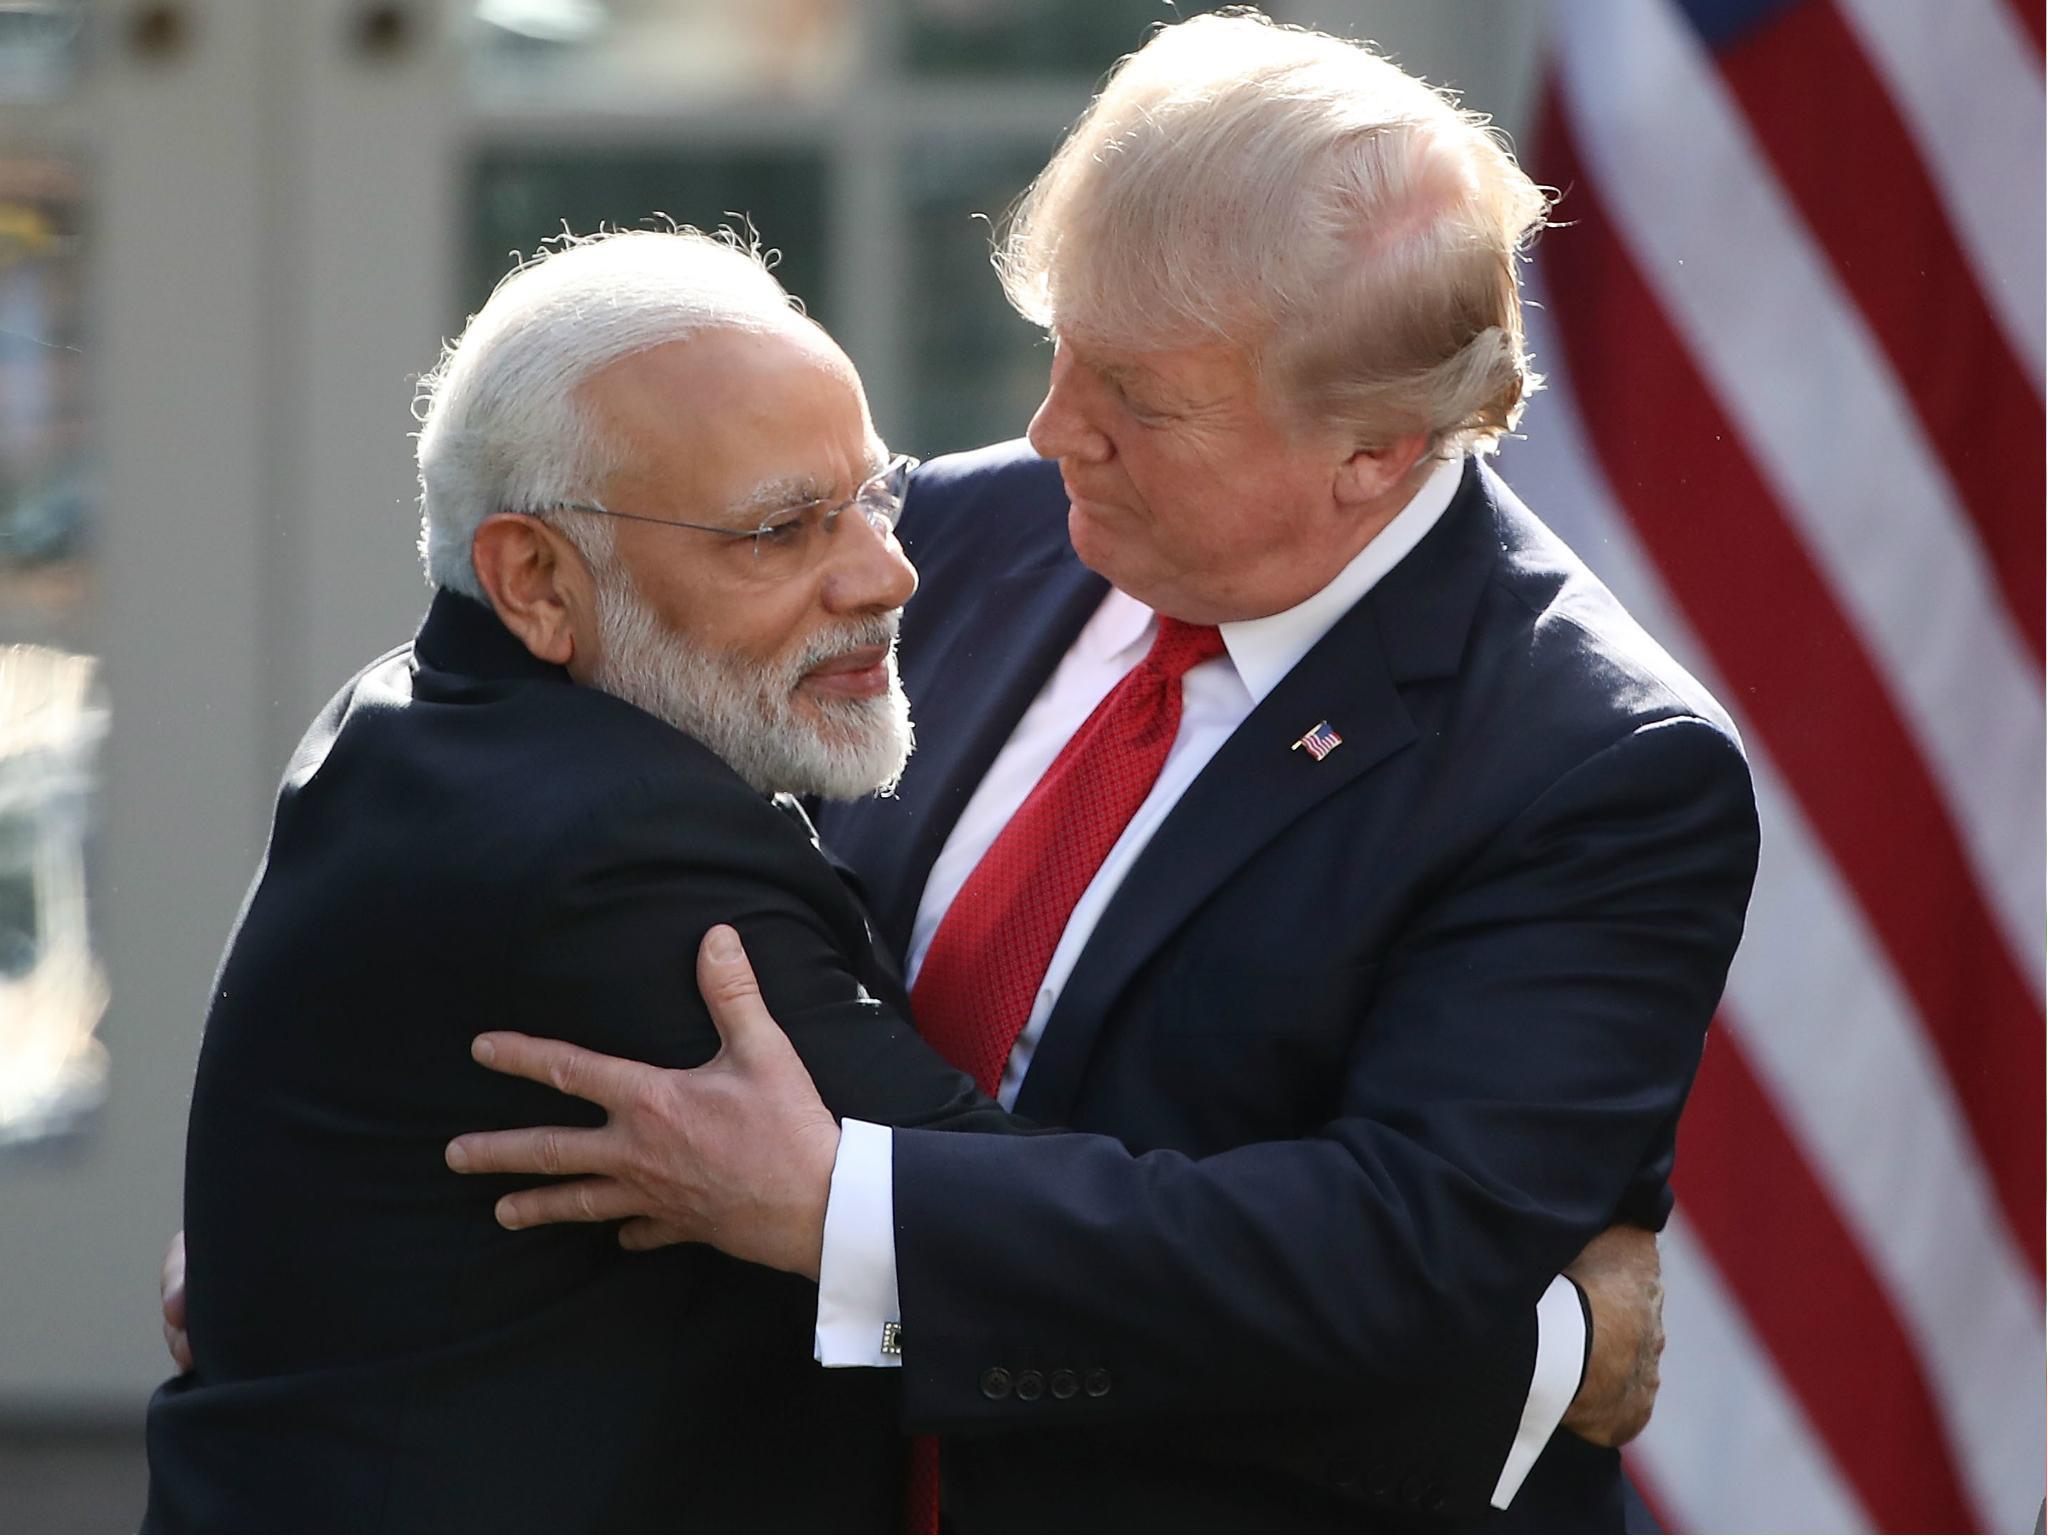 The Indian PM wasn’t reticent or embarrassed in meeting Trump, unlike other world leaders